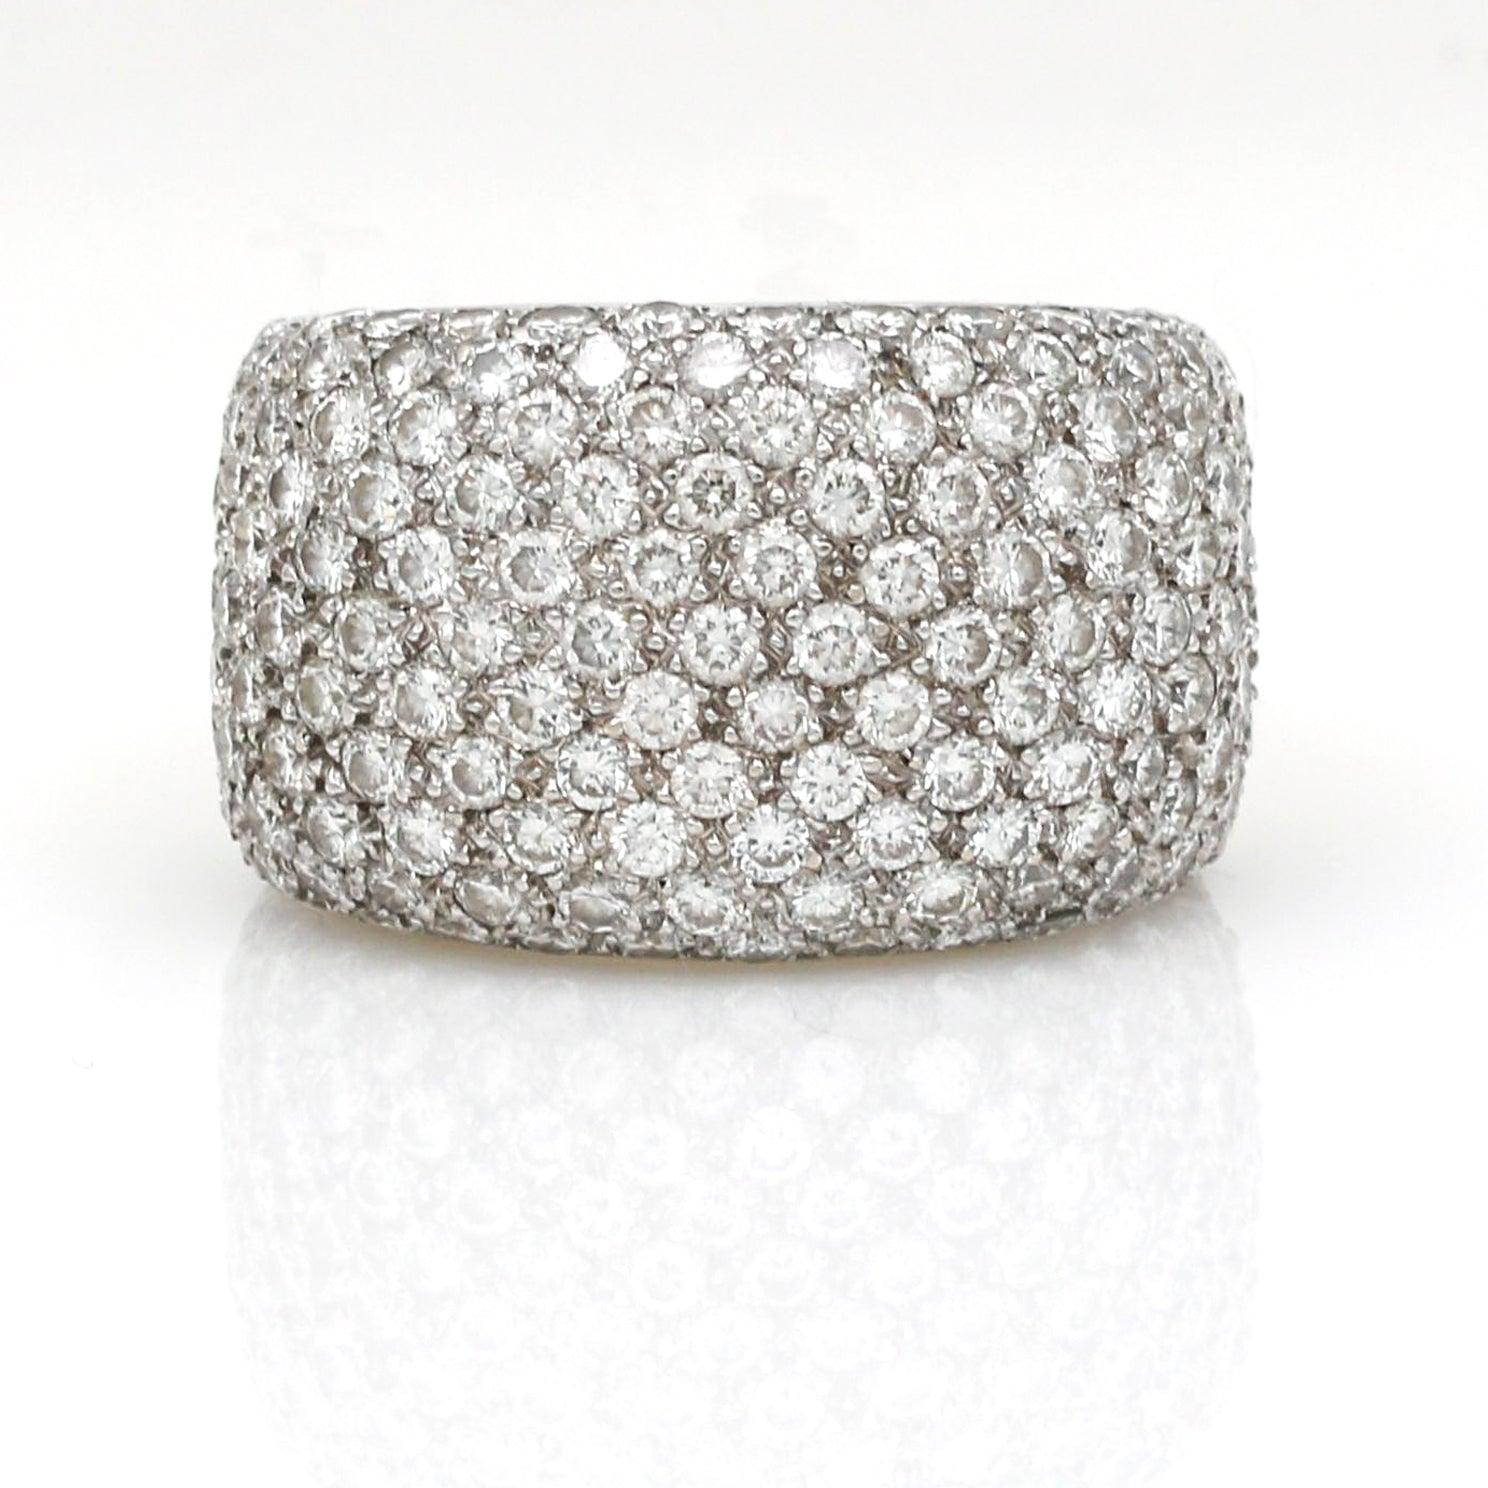 Pave Diamond Statement Ring in 18k White and Yellow Gold - 31 Jewels Inc.